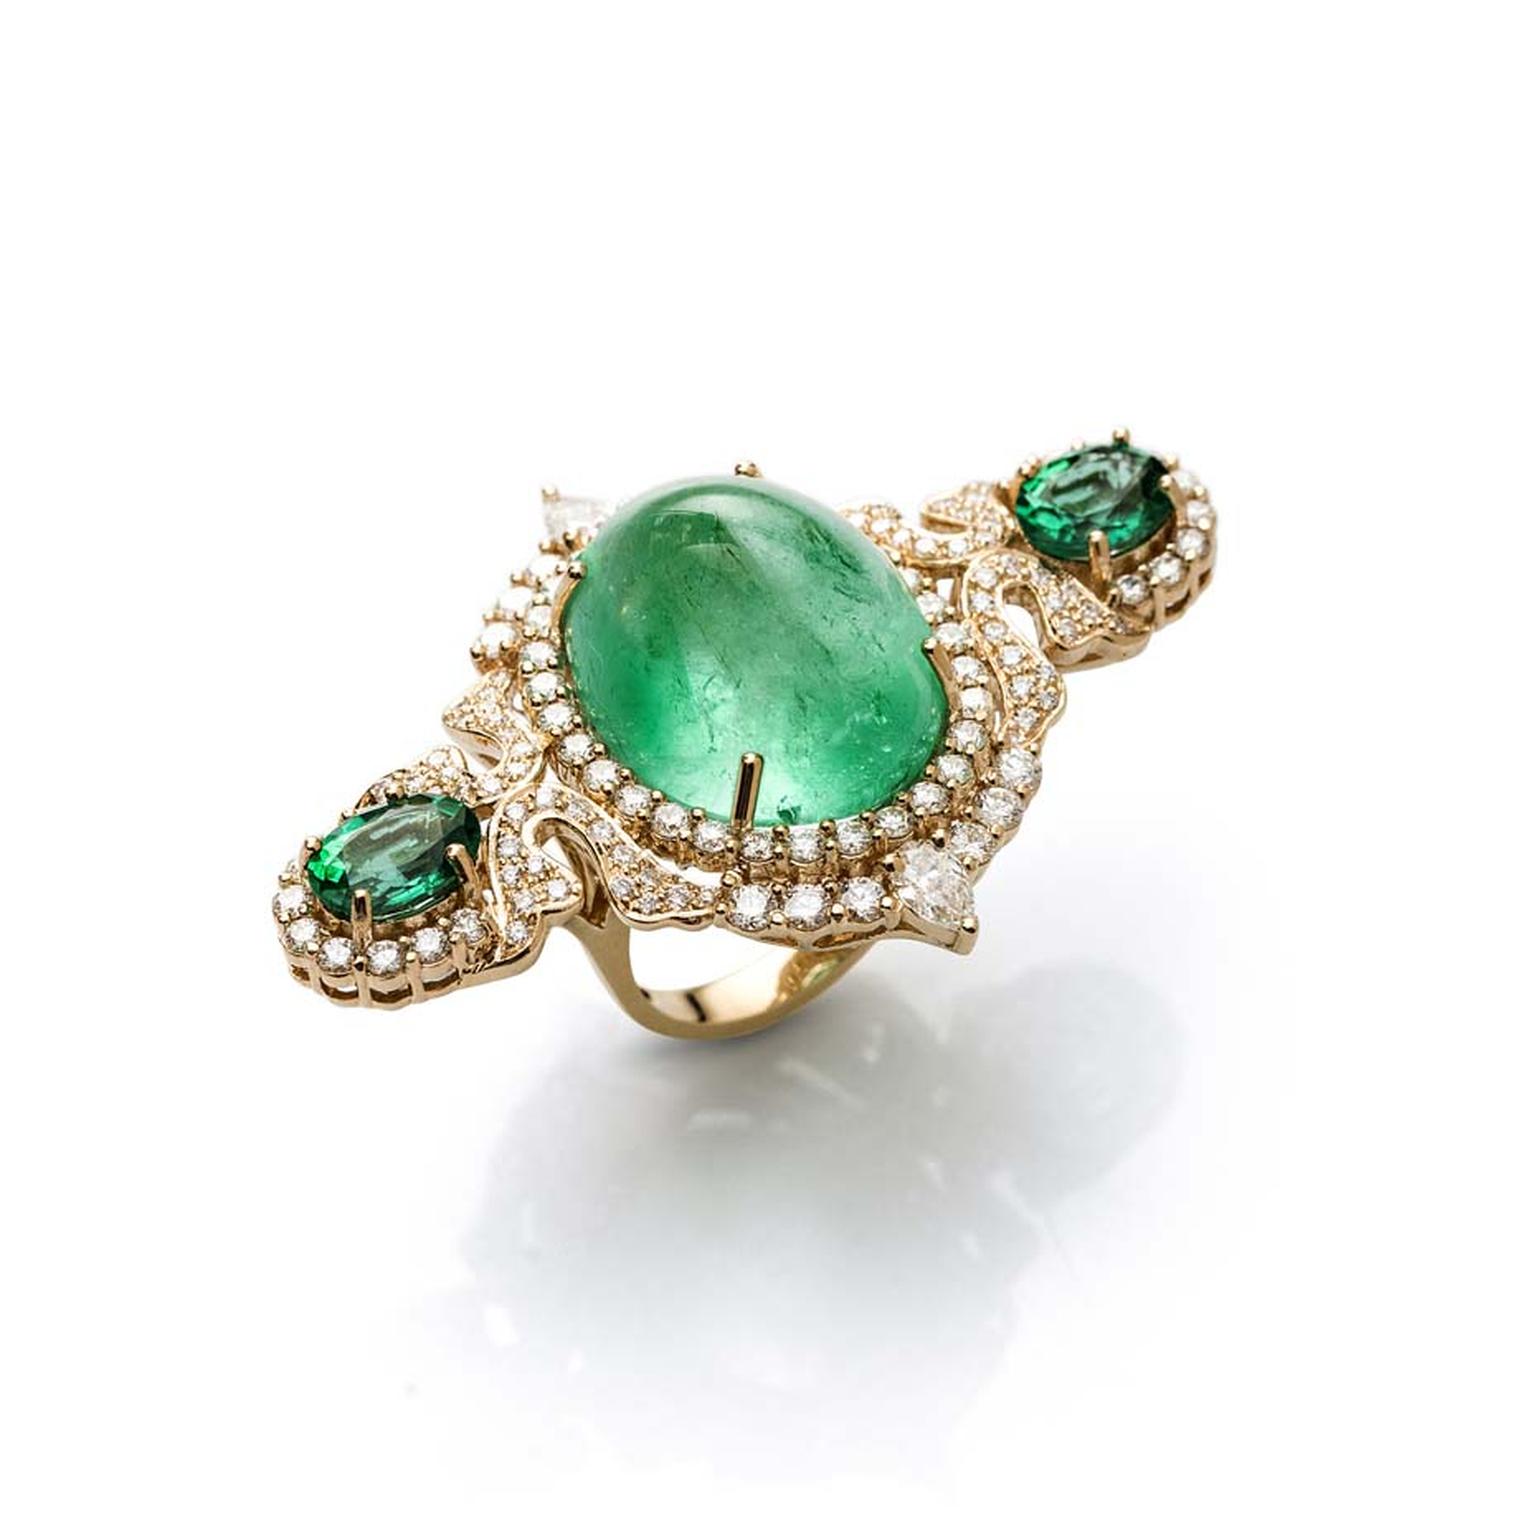 Le Jardin Exotique three-finger 30.42ct Colombian emerald Farah Khan ring in yellow gold.